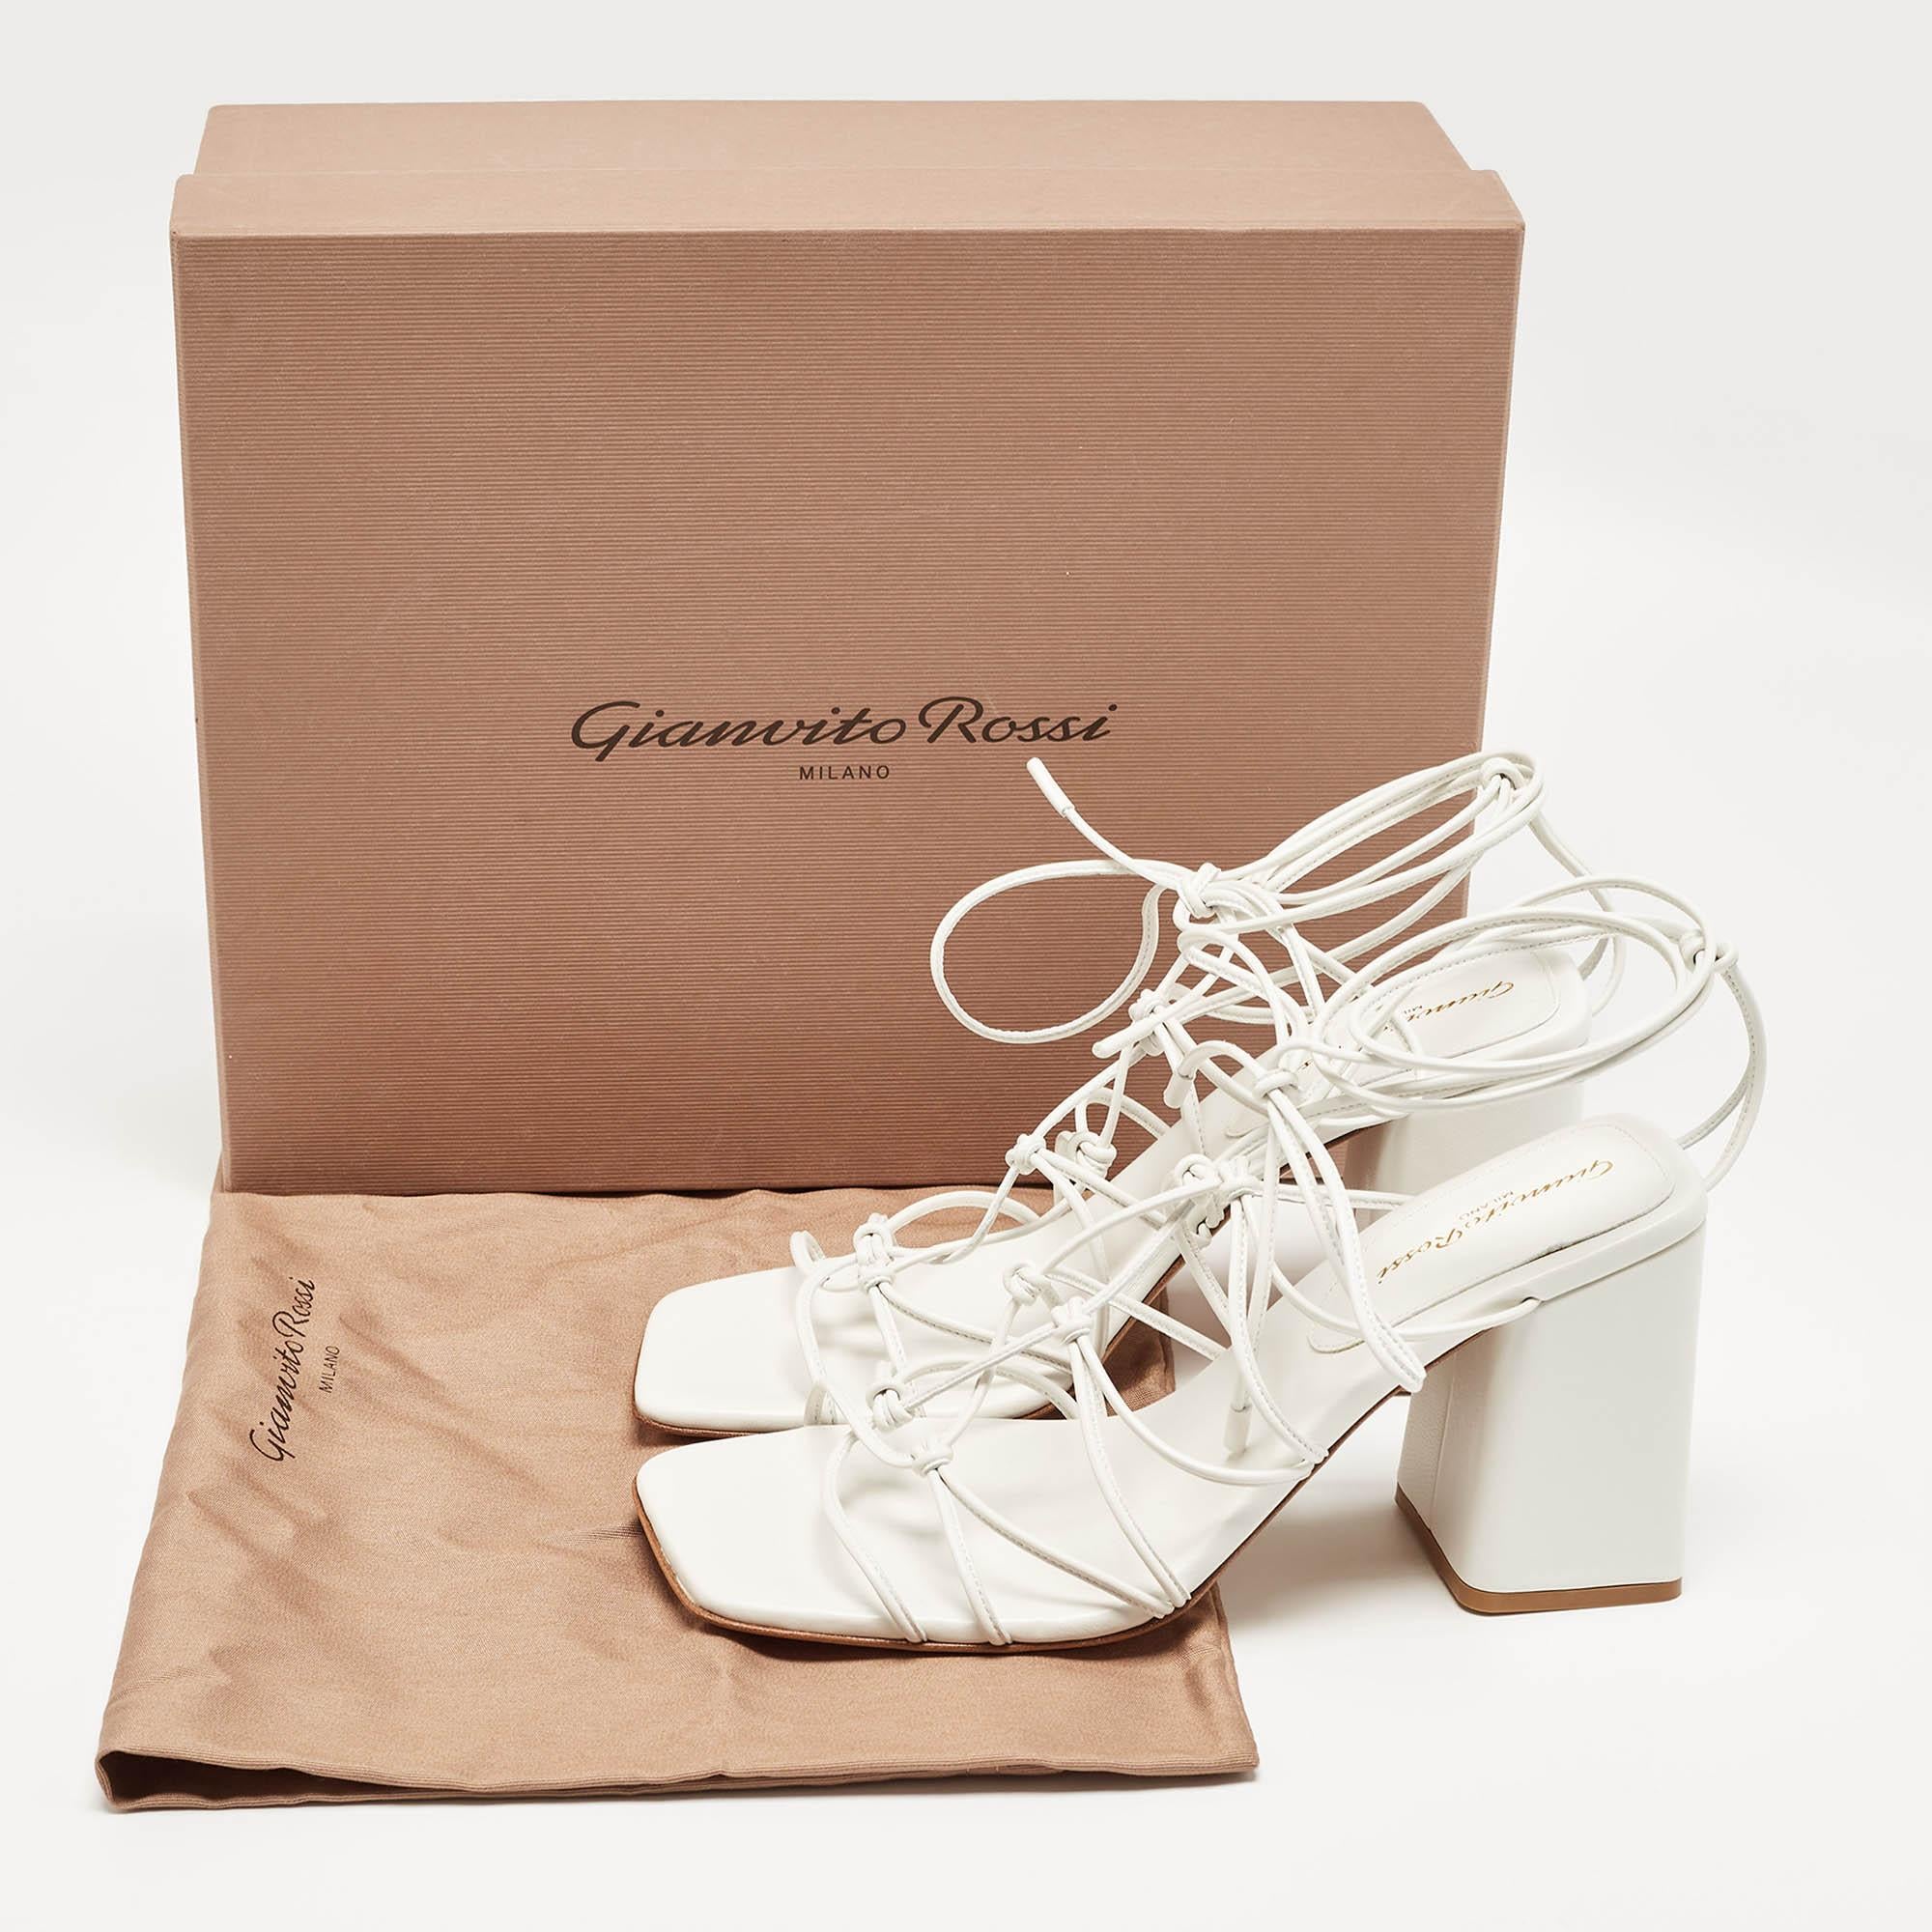 Gianvito Rossi White Leather Minas Sandals Size 39 For Sale 5